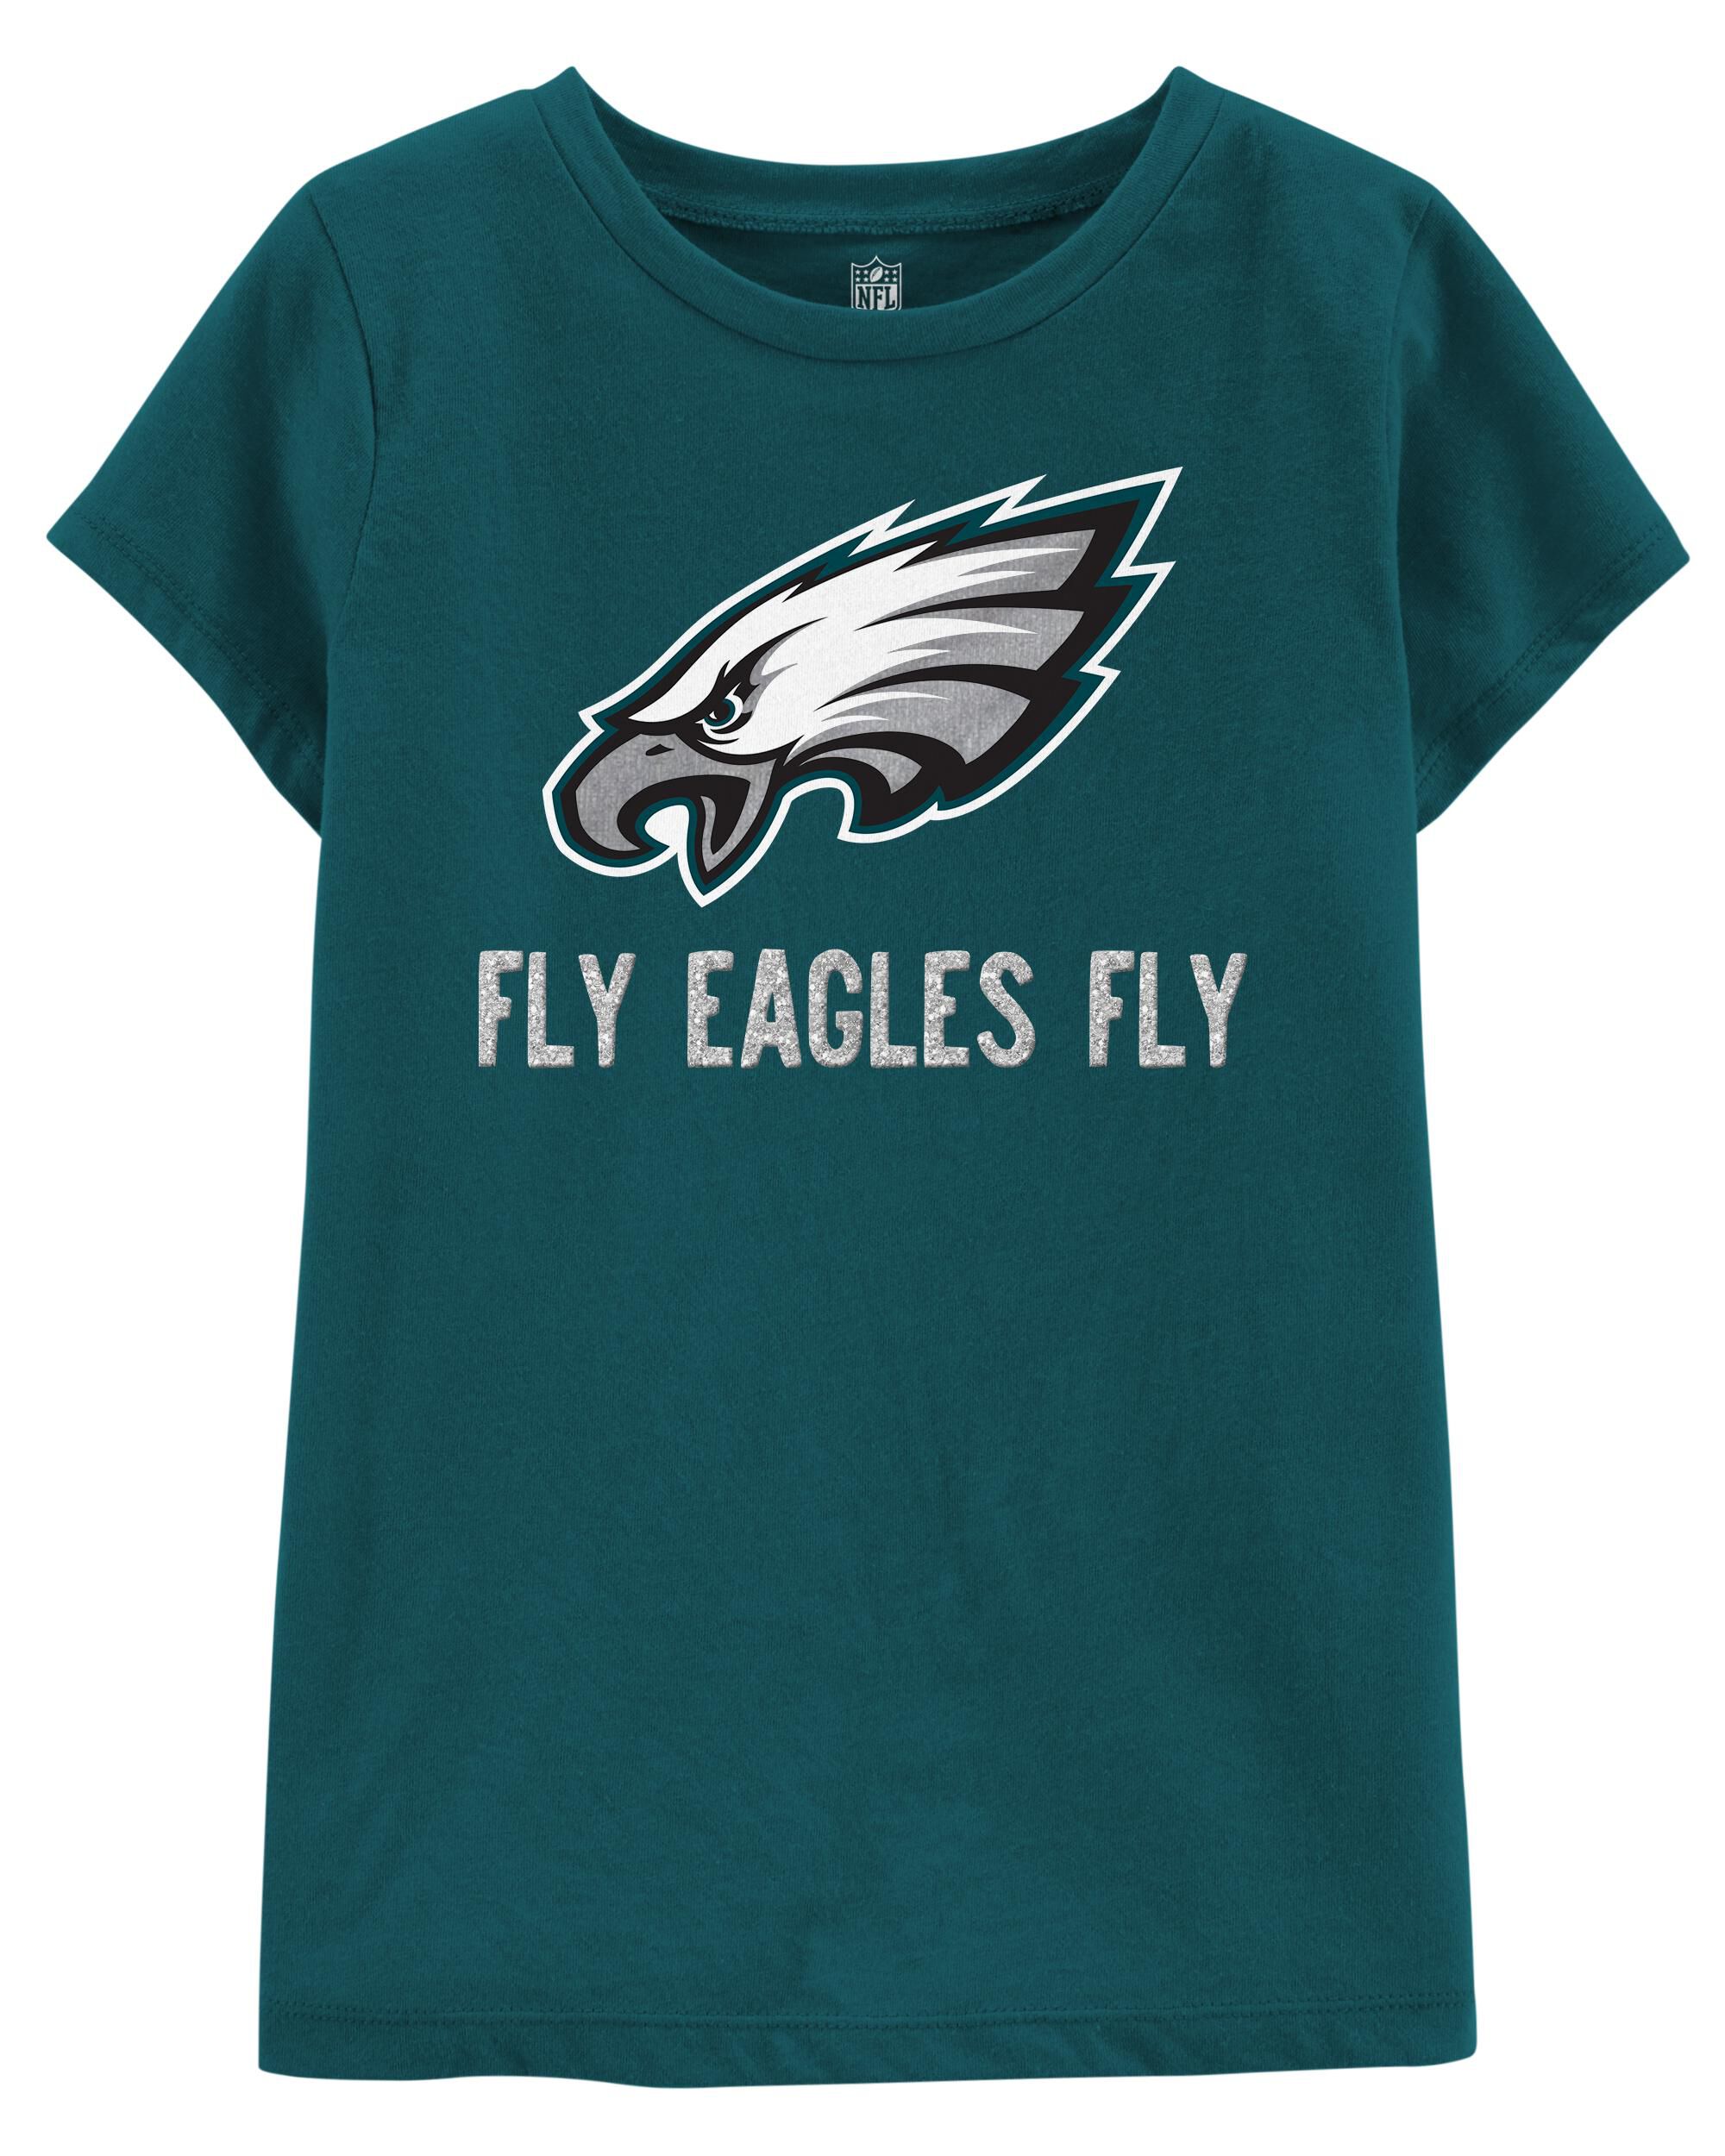 2t eagles jersey